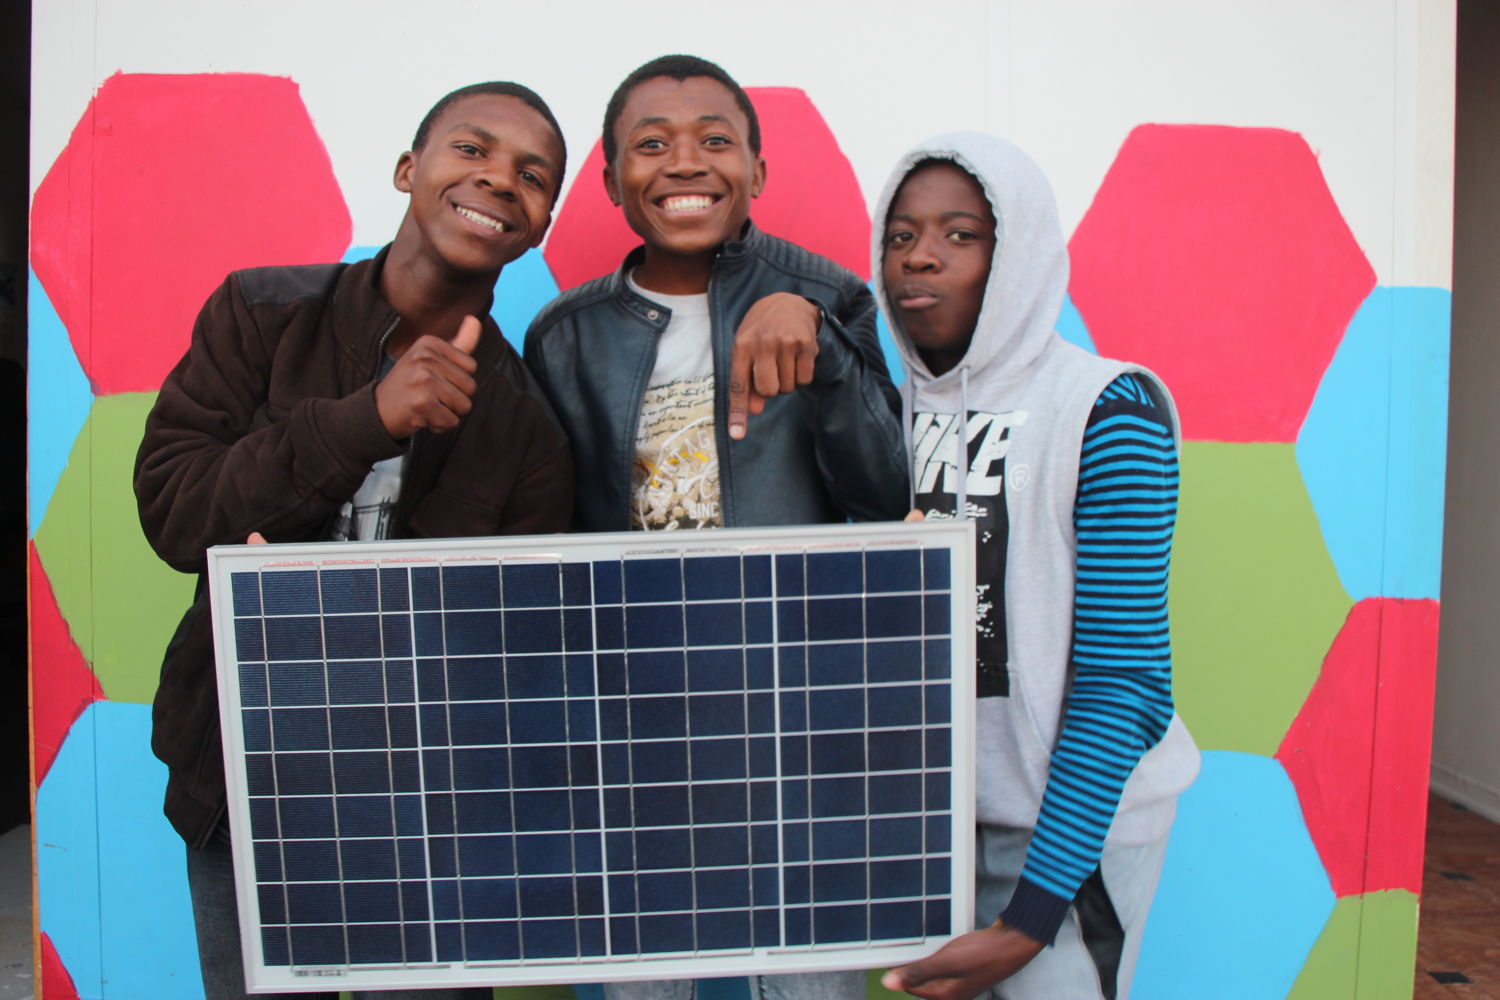 Odwa Manyi, Lunga Makhonxa and Sihle Mbothina from Bulumko High School, one of the schools involved in the Playing with Solar project.